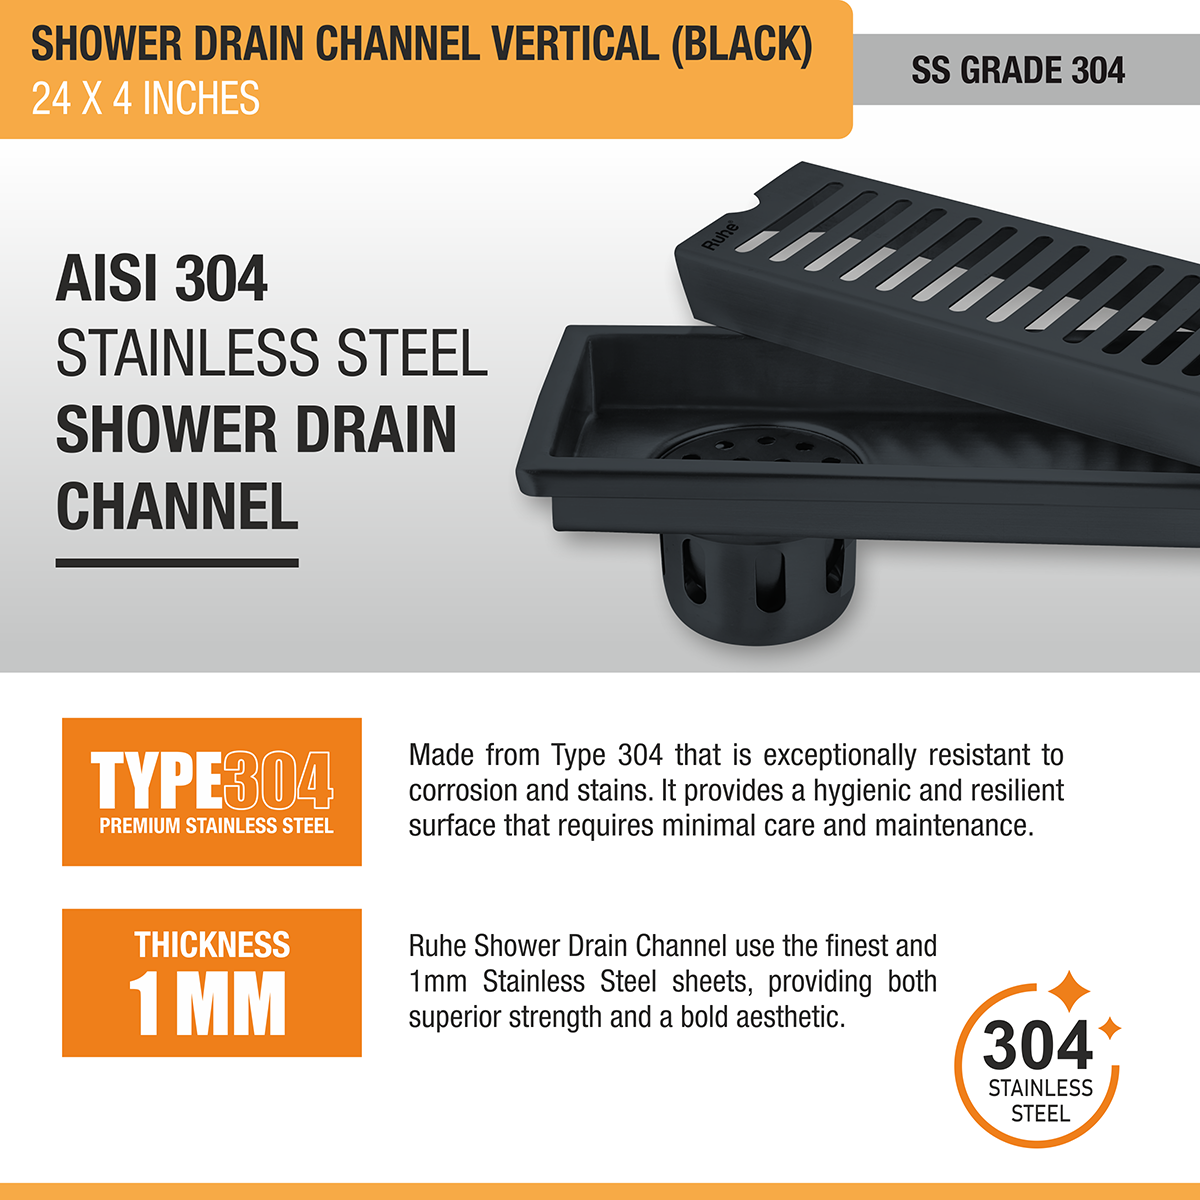 Vertical Shower Drain Channel (24 x 4 Inches) Black PVD Coated stainless steel